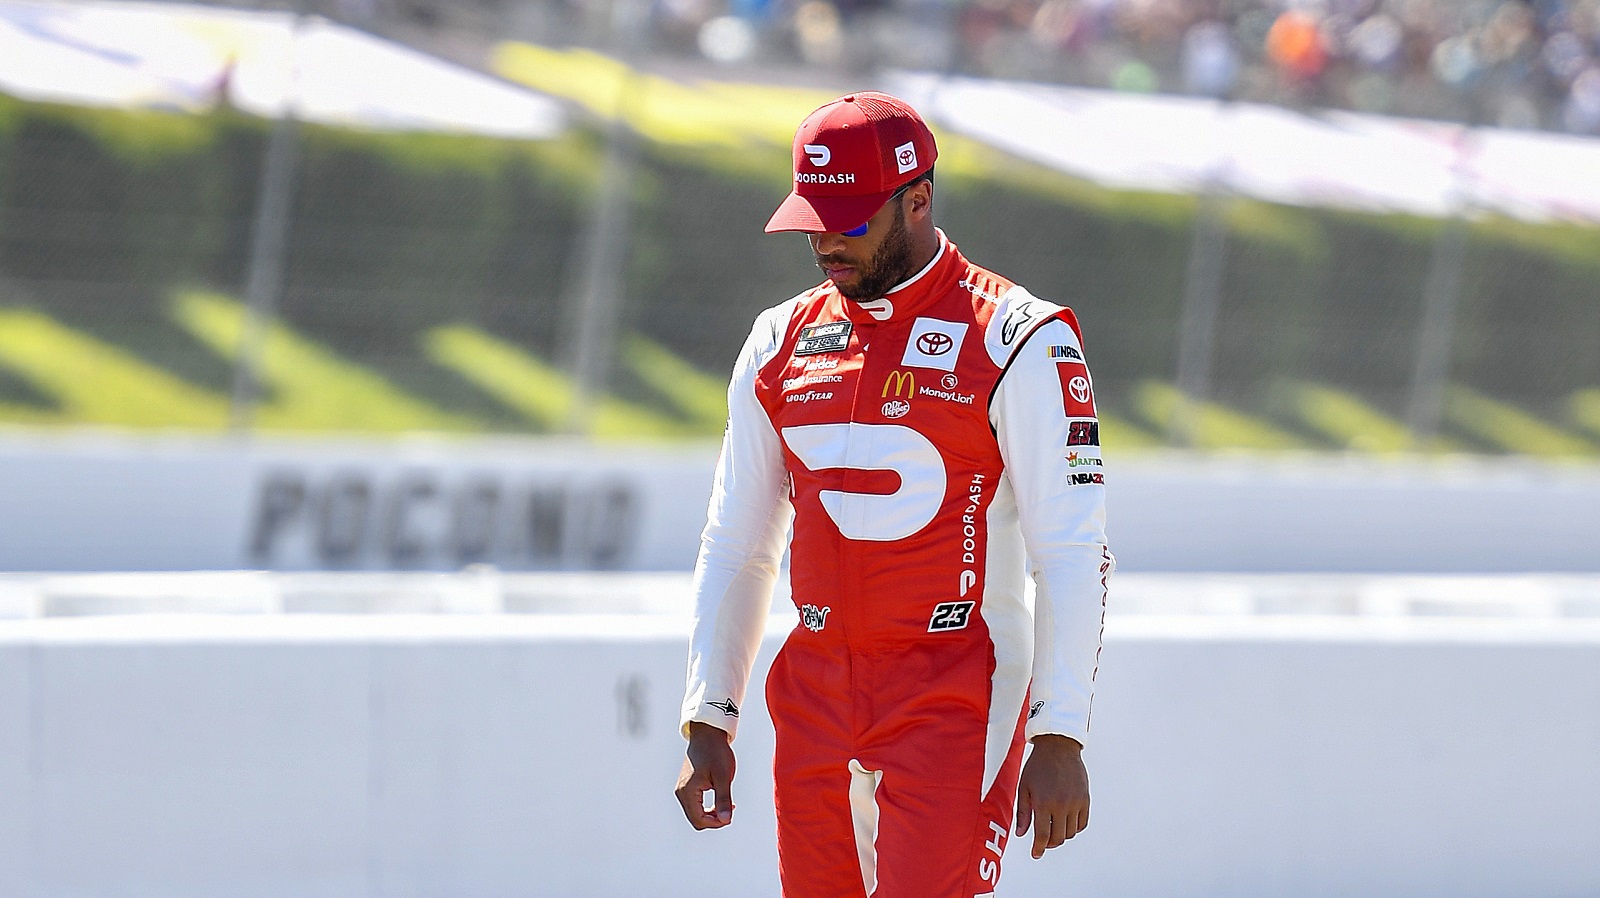 Bubba Wallace walks the grid during qualifying for the NASCAR Cup Series M&M's Fan Appreciation 400 at Pocono Raceway on July 23, 2022. | Logan Riely/Getty Images